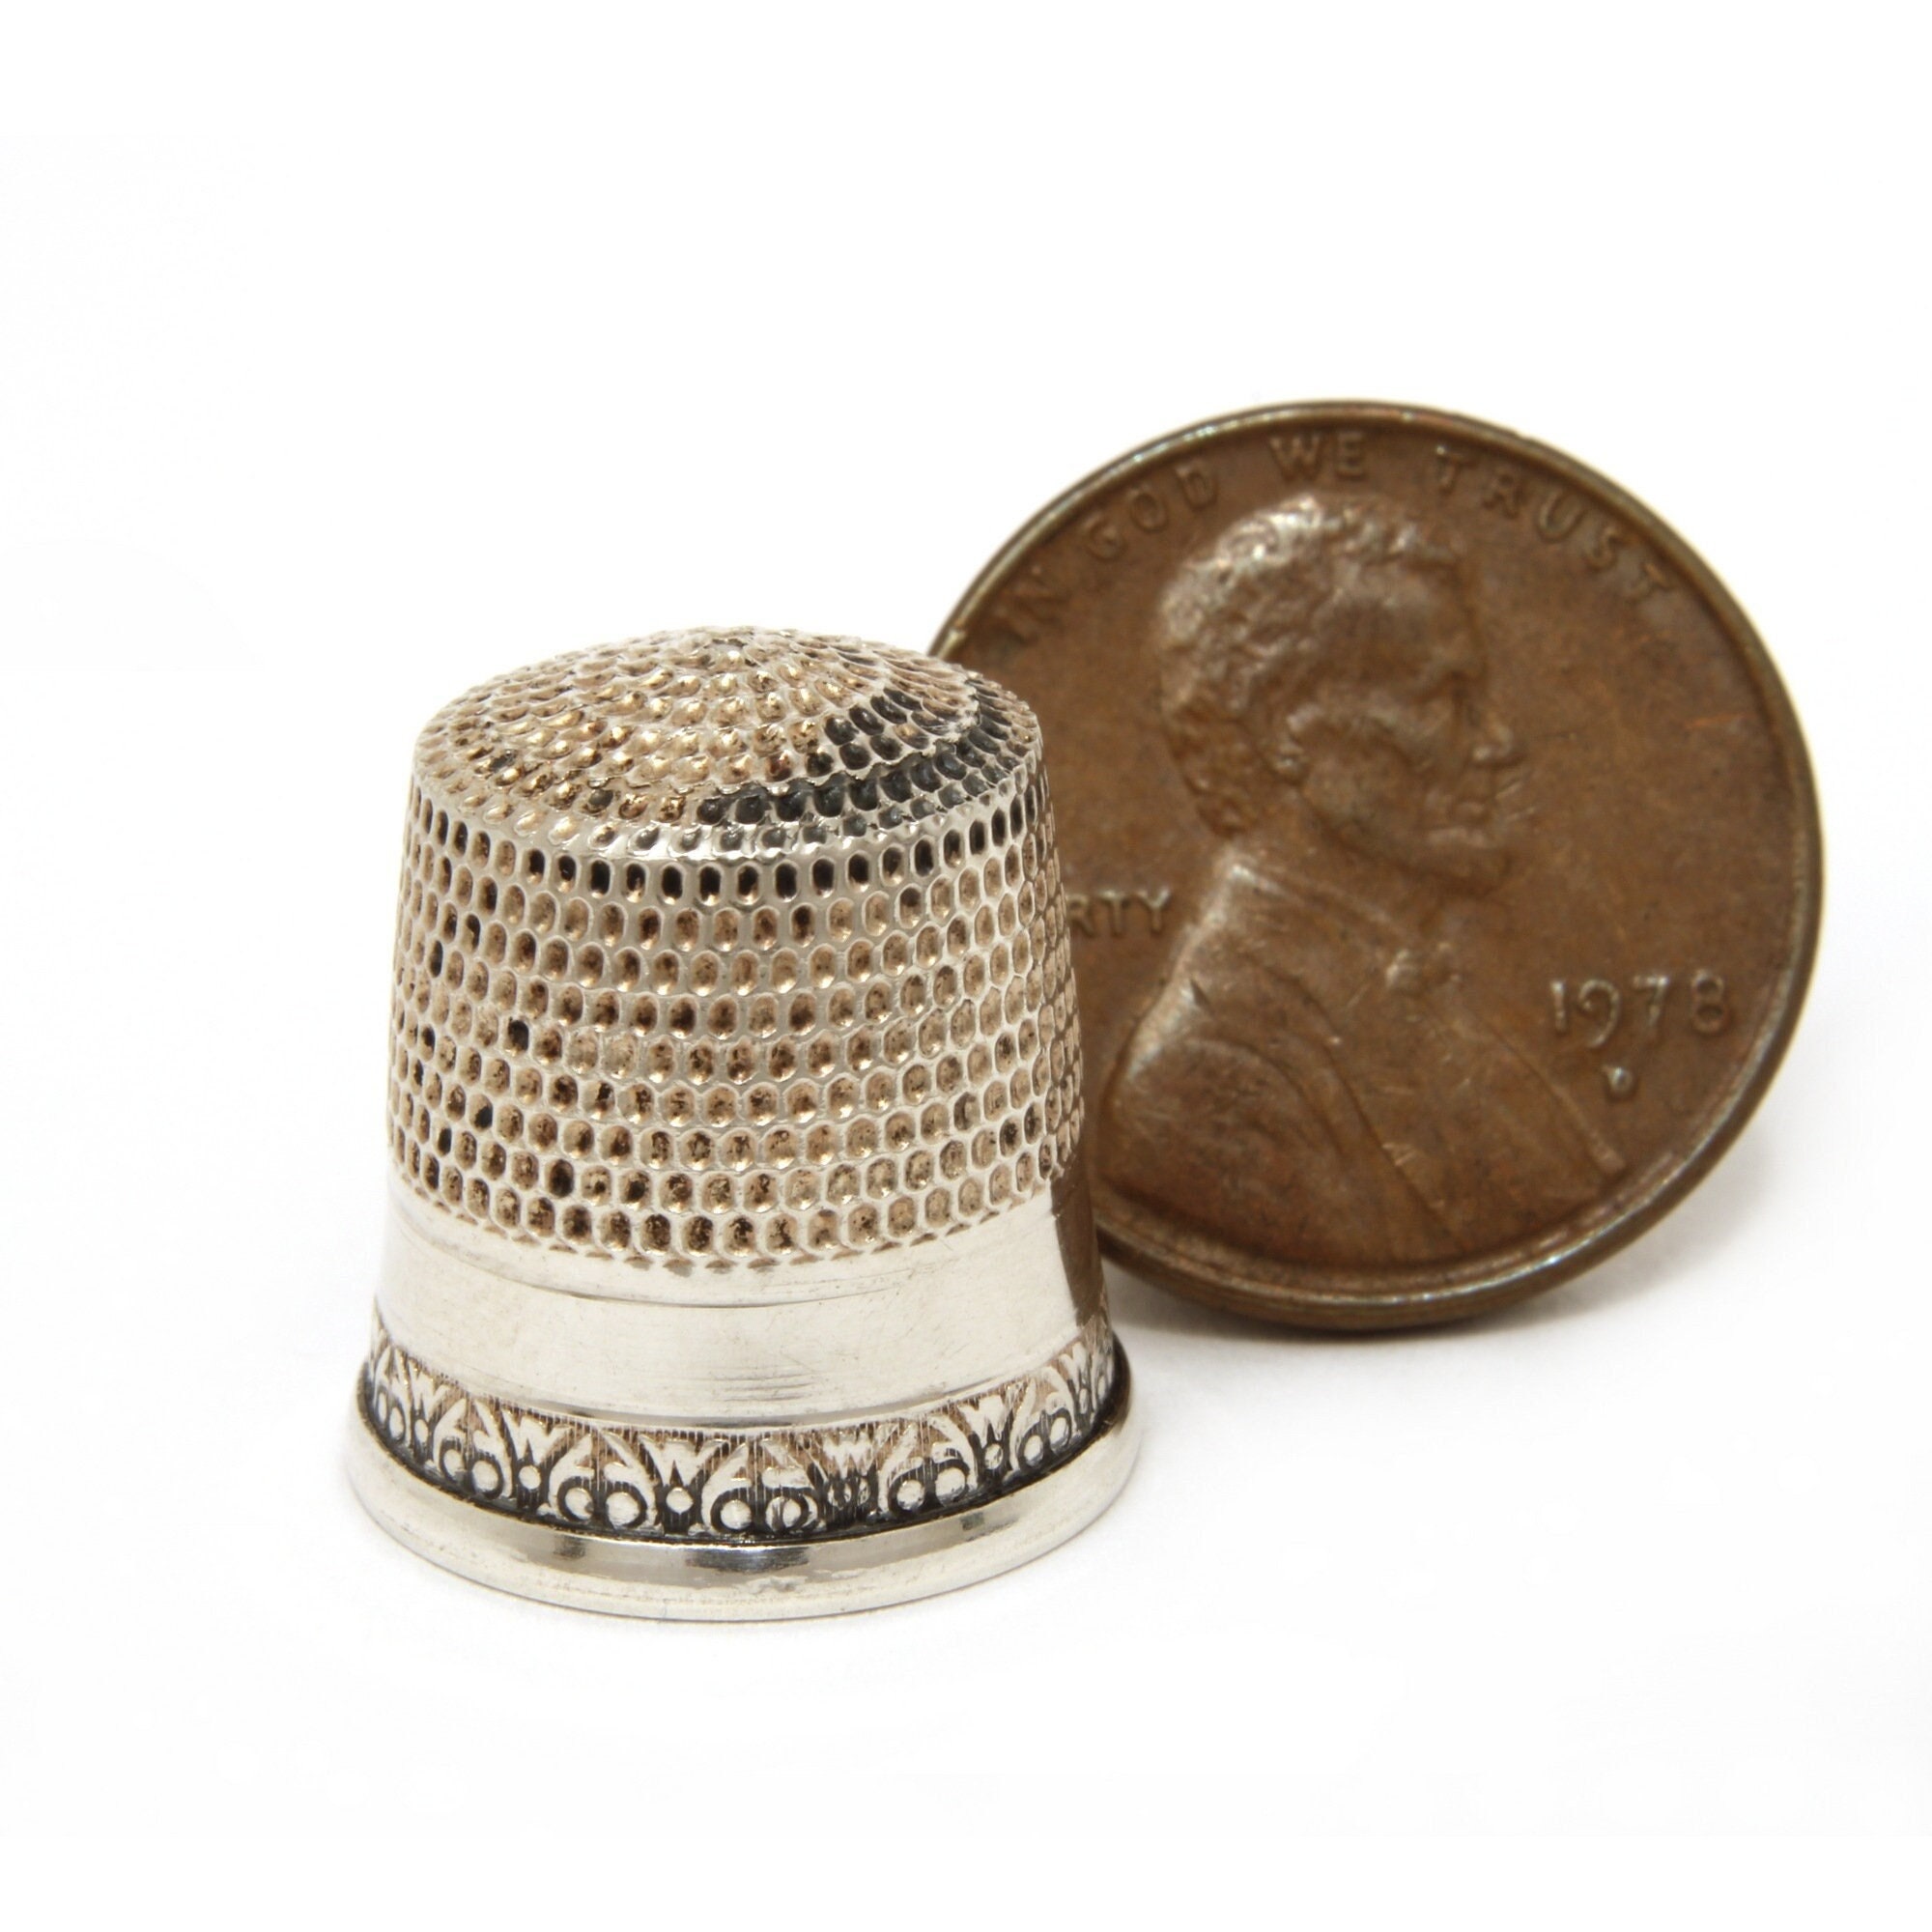 Tulip Sashiko Palm Thimble for sewing, quilting, needlepoint, and  embroidery SN-009e